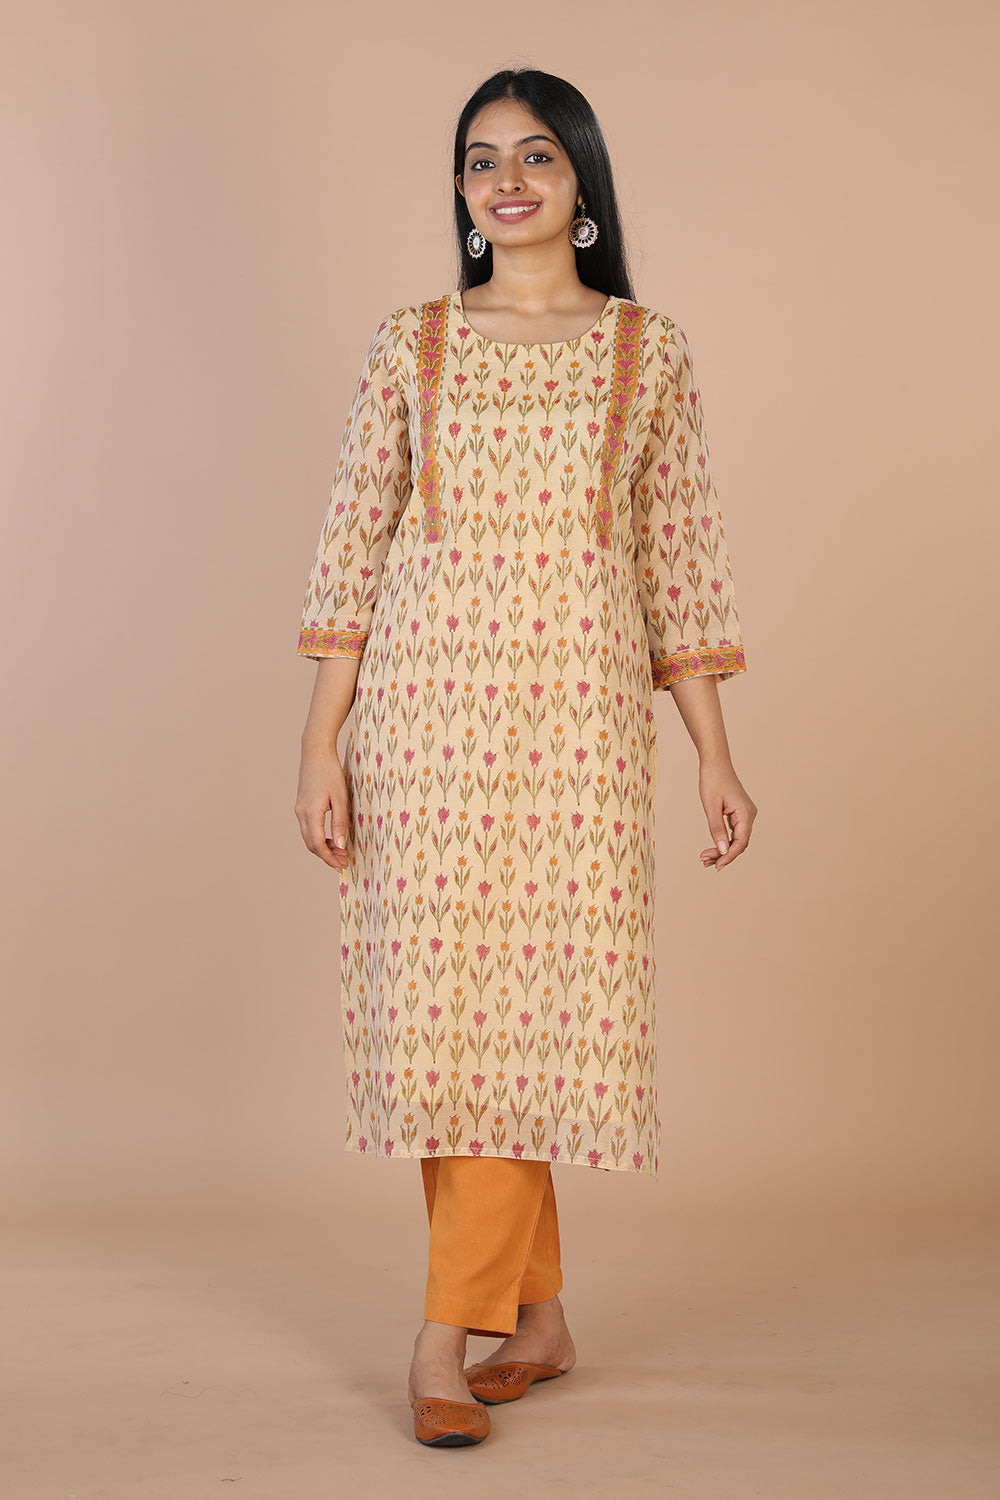 Buy Bengal Kantha Embroidery Pure Cotton Kurta Material, 47% OFF